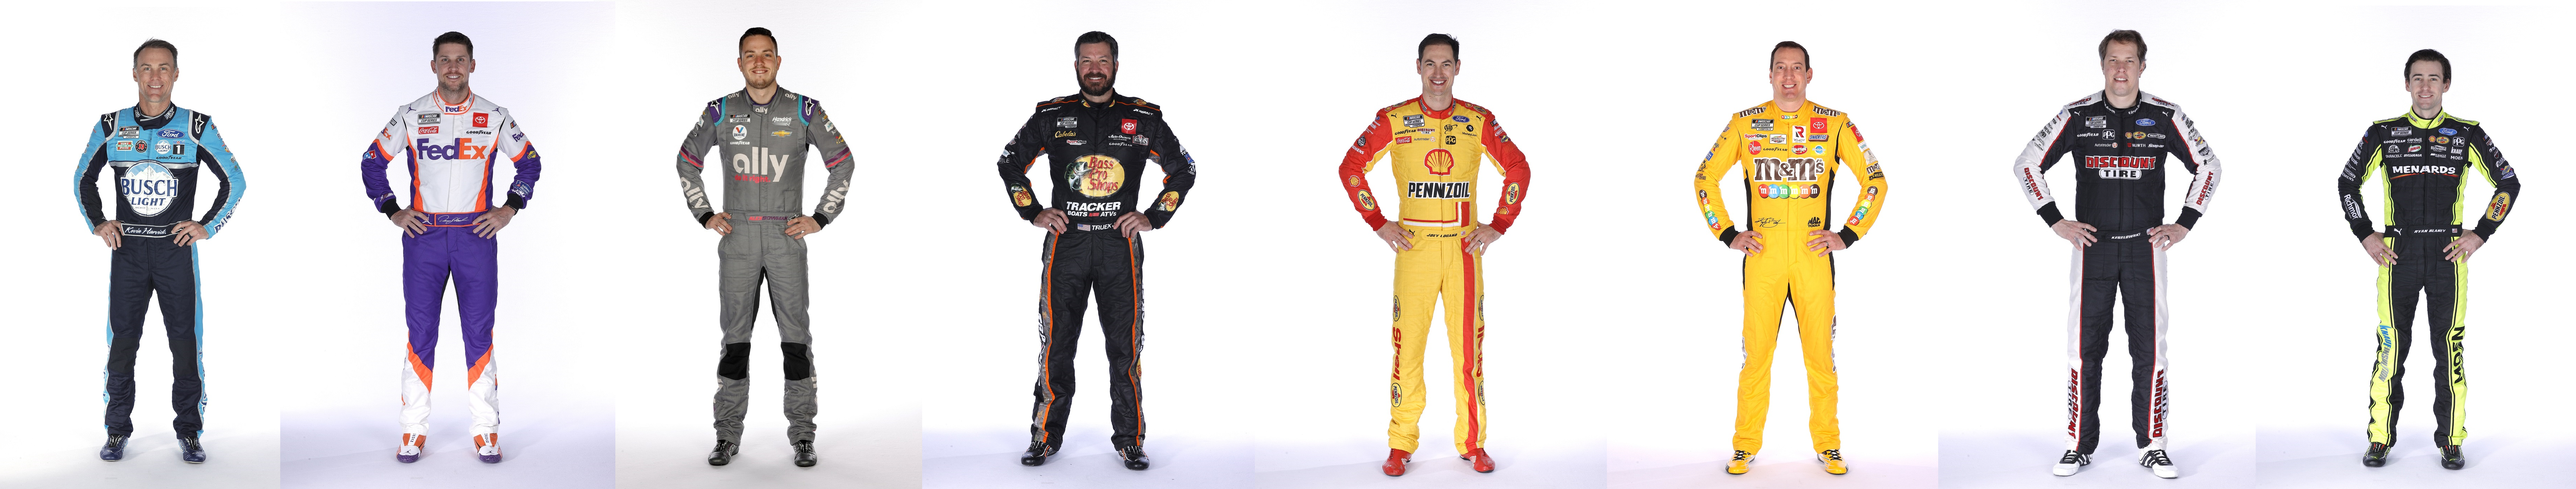 Can one of these eight get lucky in the South Point 400 at Las Vegas?